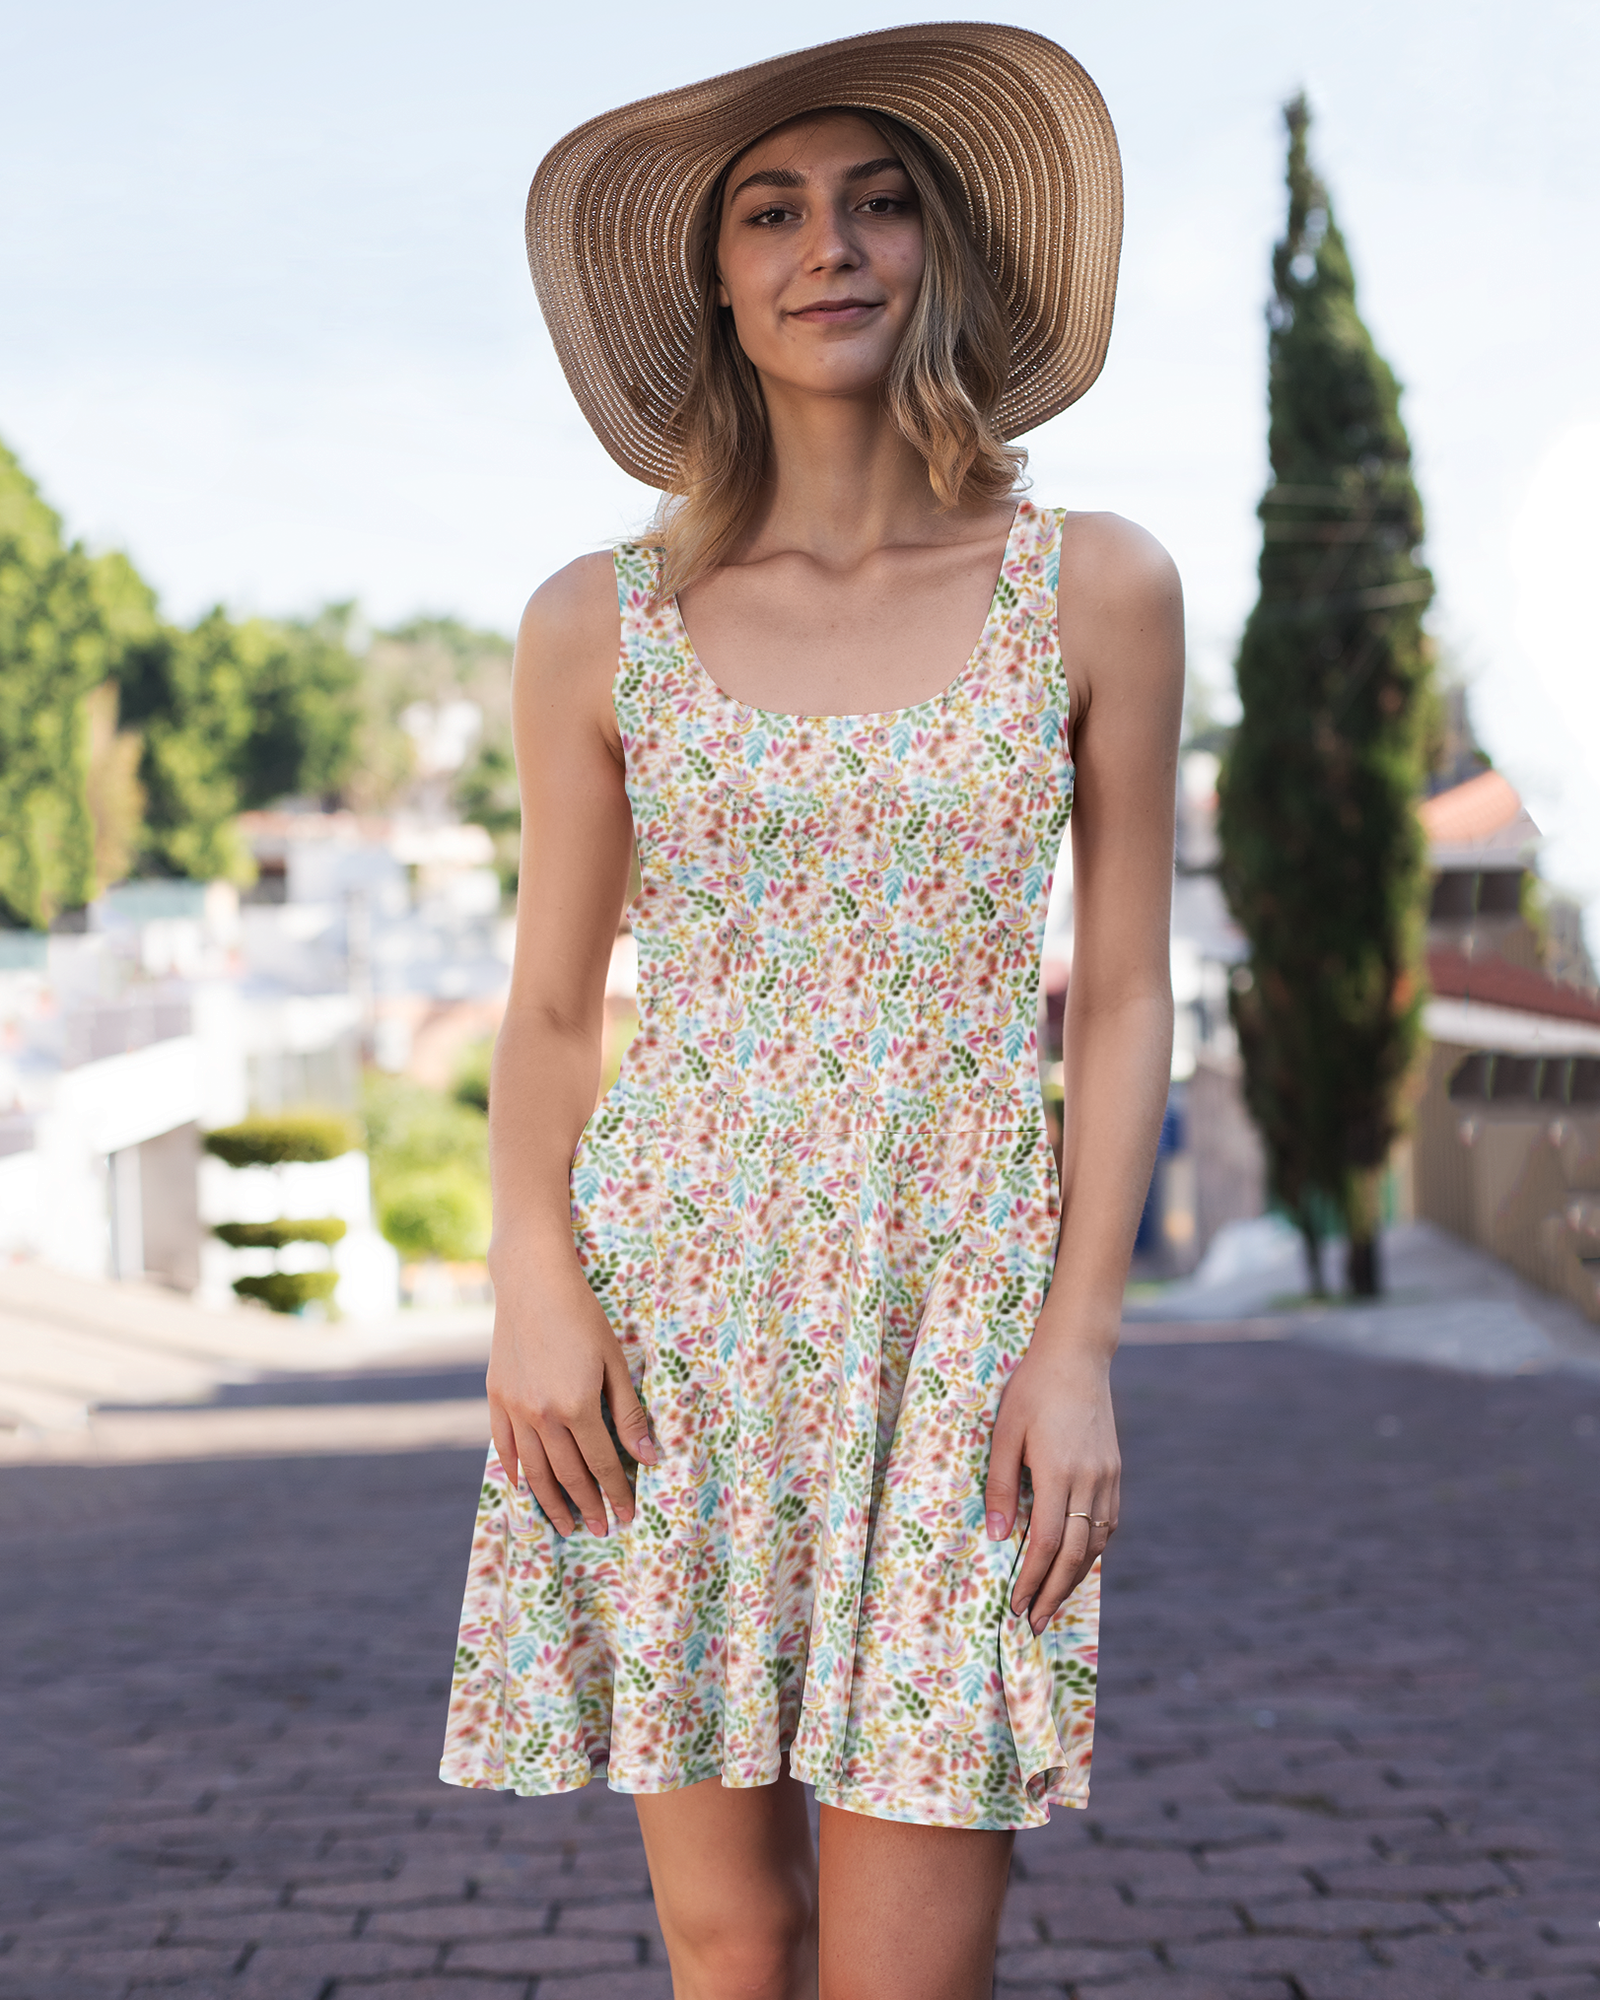 Garden Gala pastel floral sleeveless scoop neck fit and flare dress on smiling thin woman in a hat standing in front of a street scene